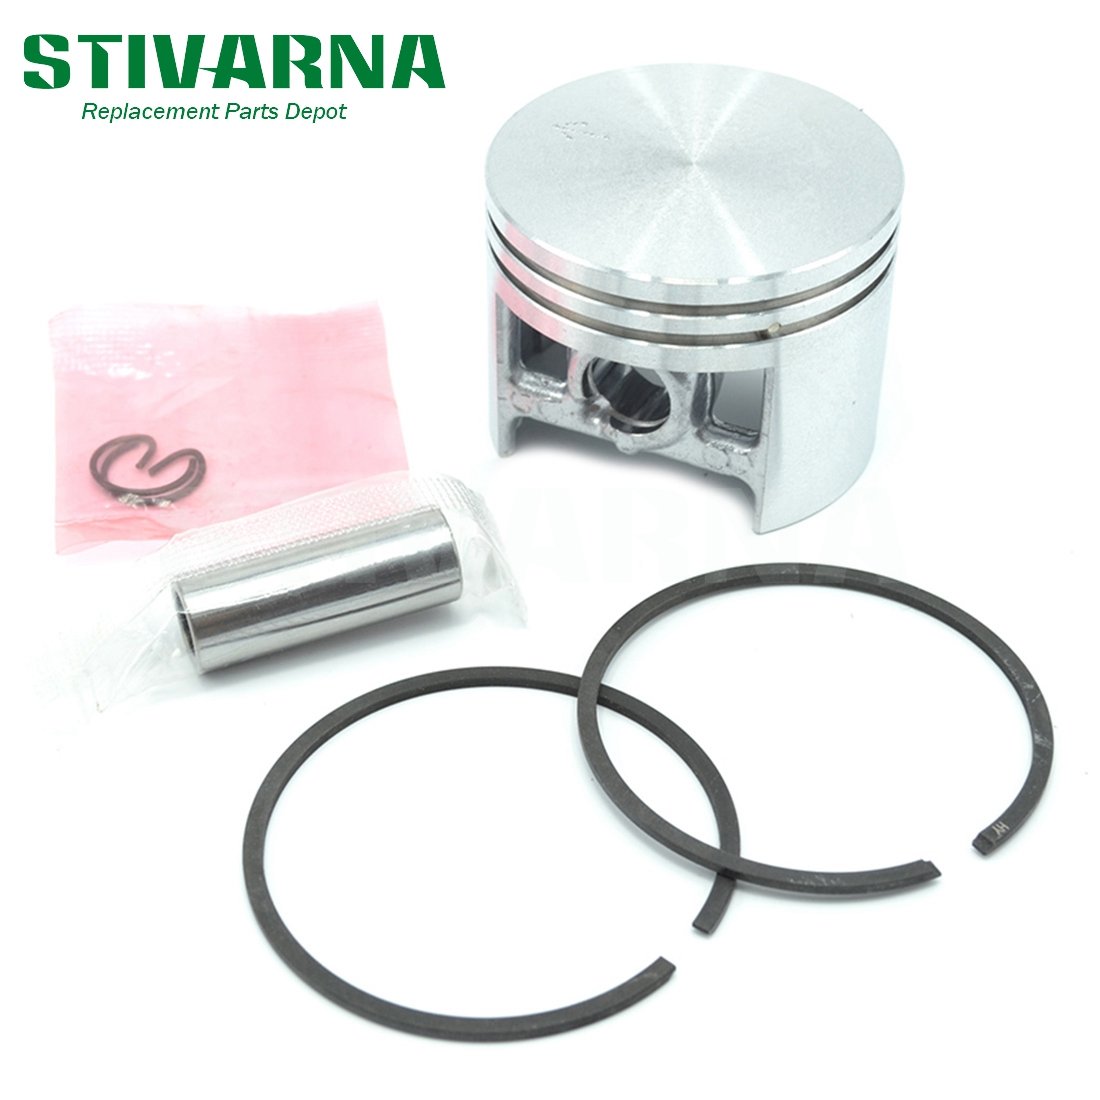 Piston Kit Fit for Stihl 038/ MS380/ MS381 52mm Replace 1119 030 2003